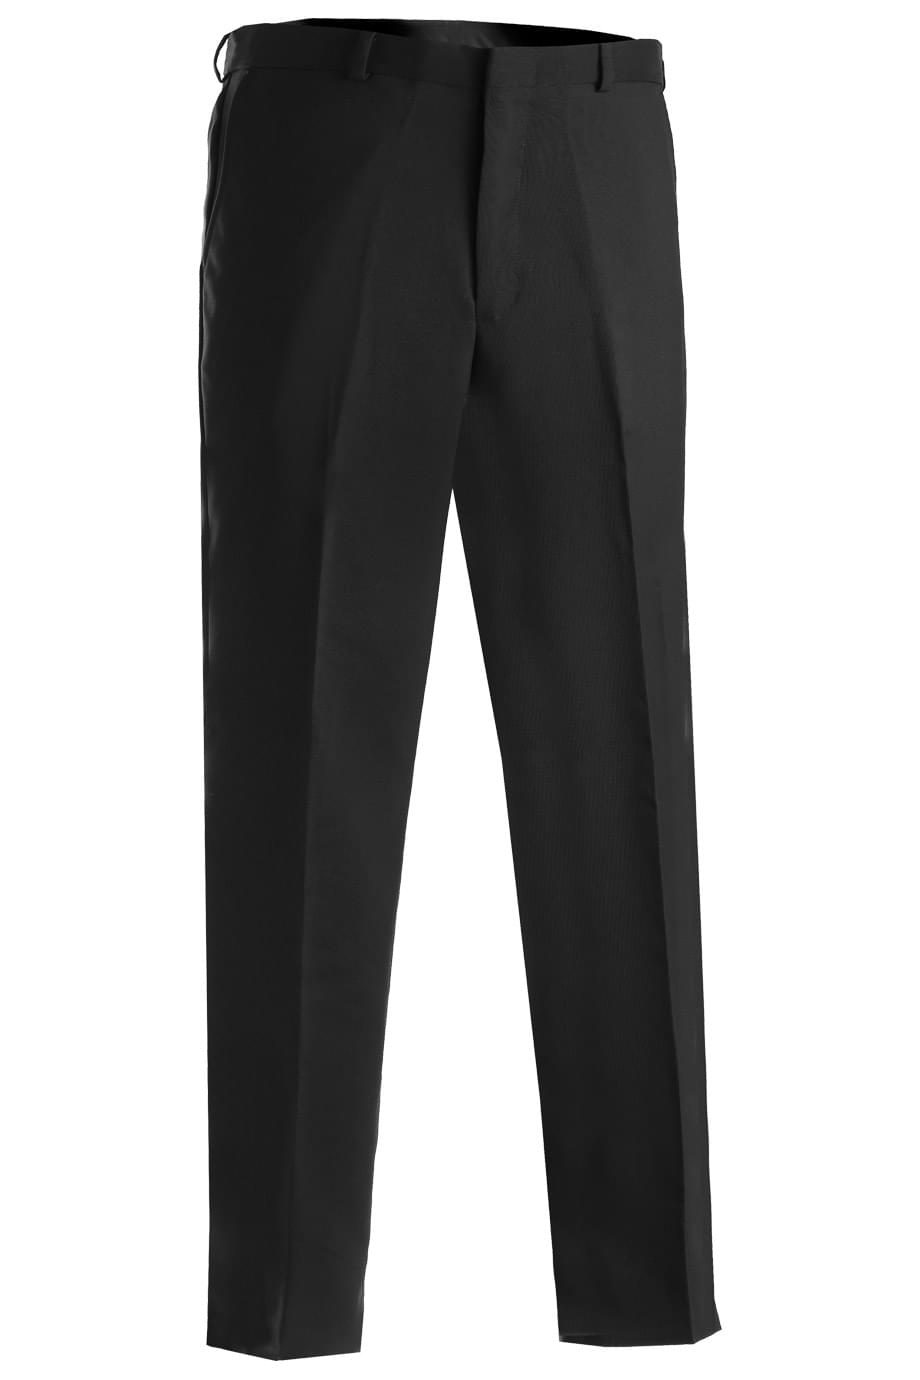 edwards POLYESTER FLAT FRONT PANT